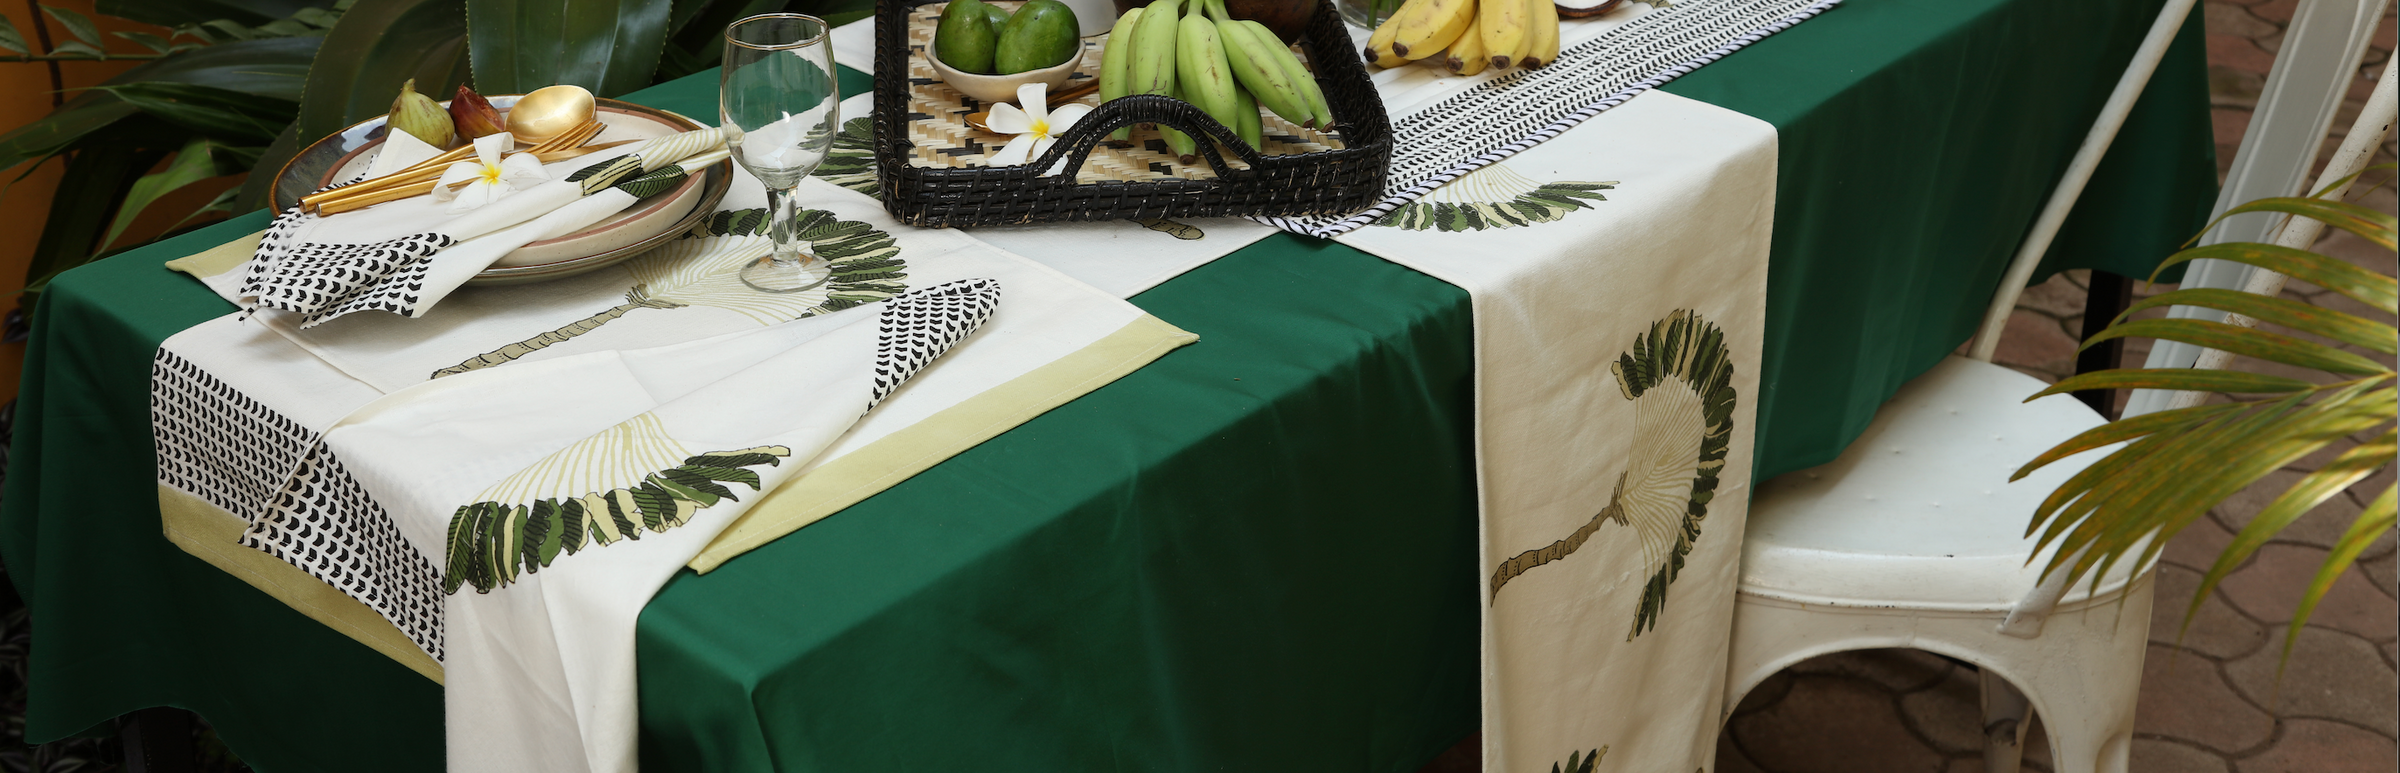 Placemats and Napkins Set